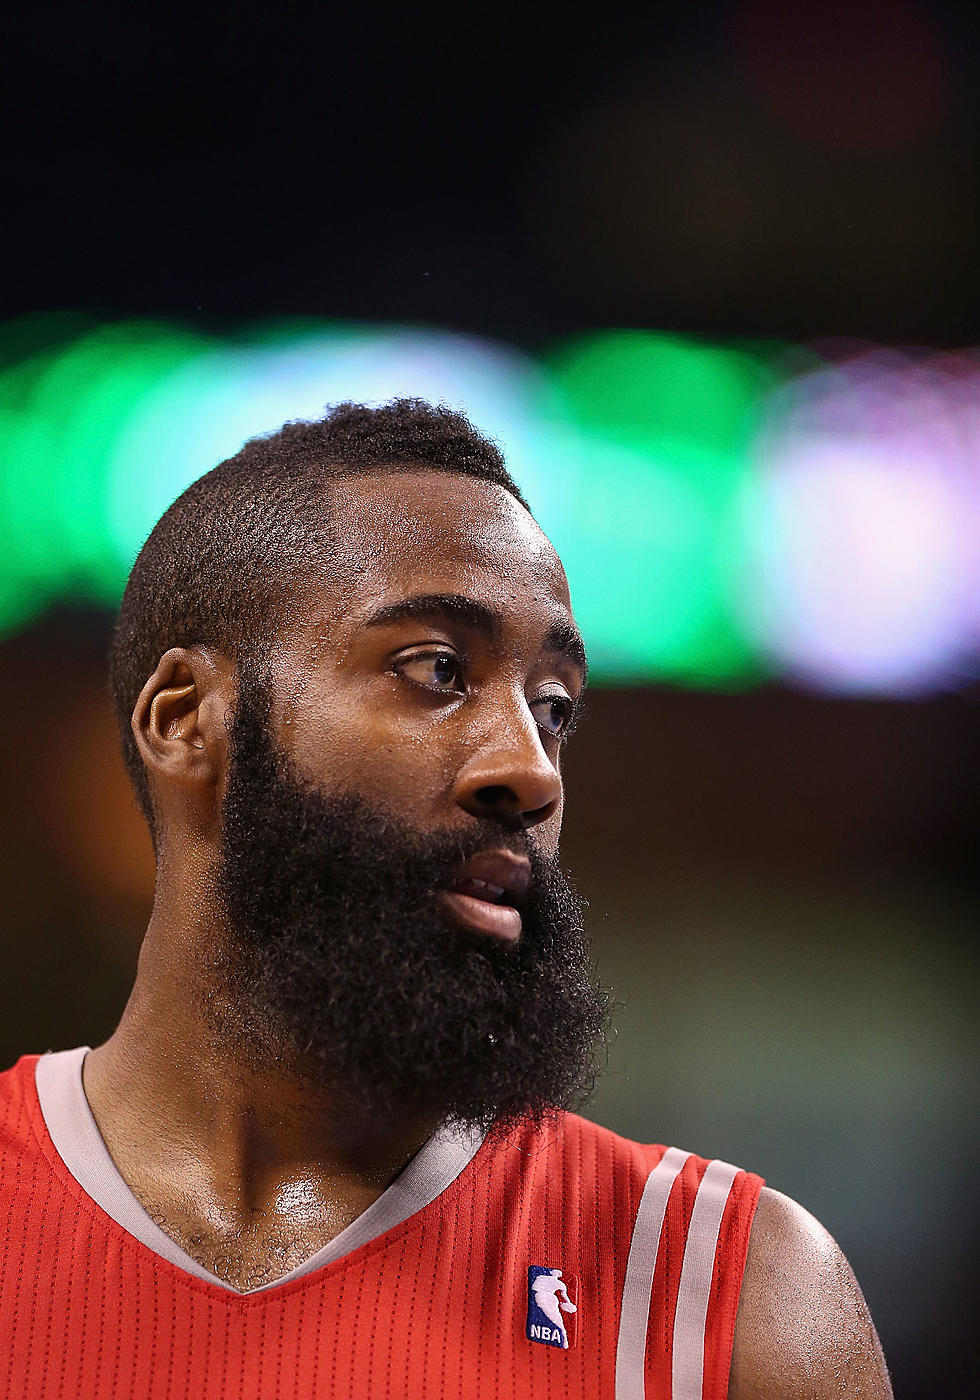 James Harden Paid $100k For A Date?!